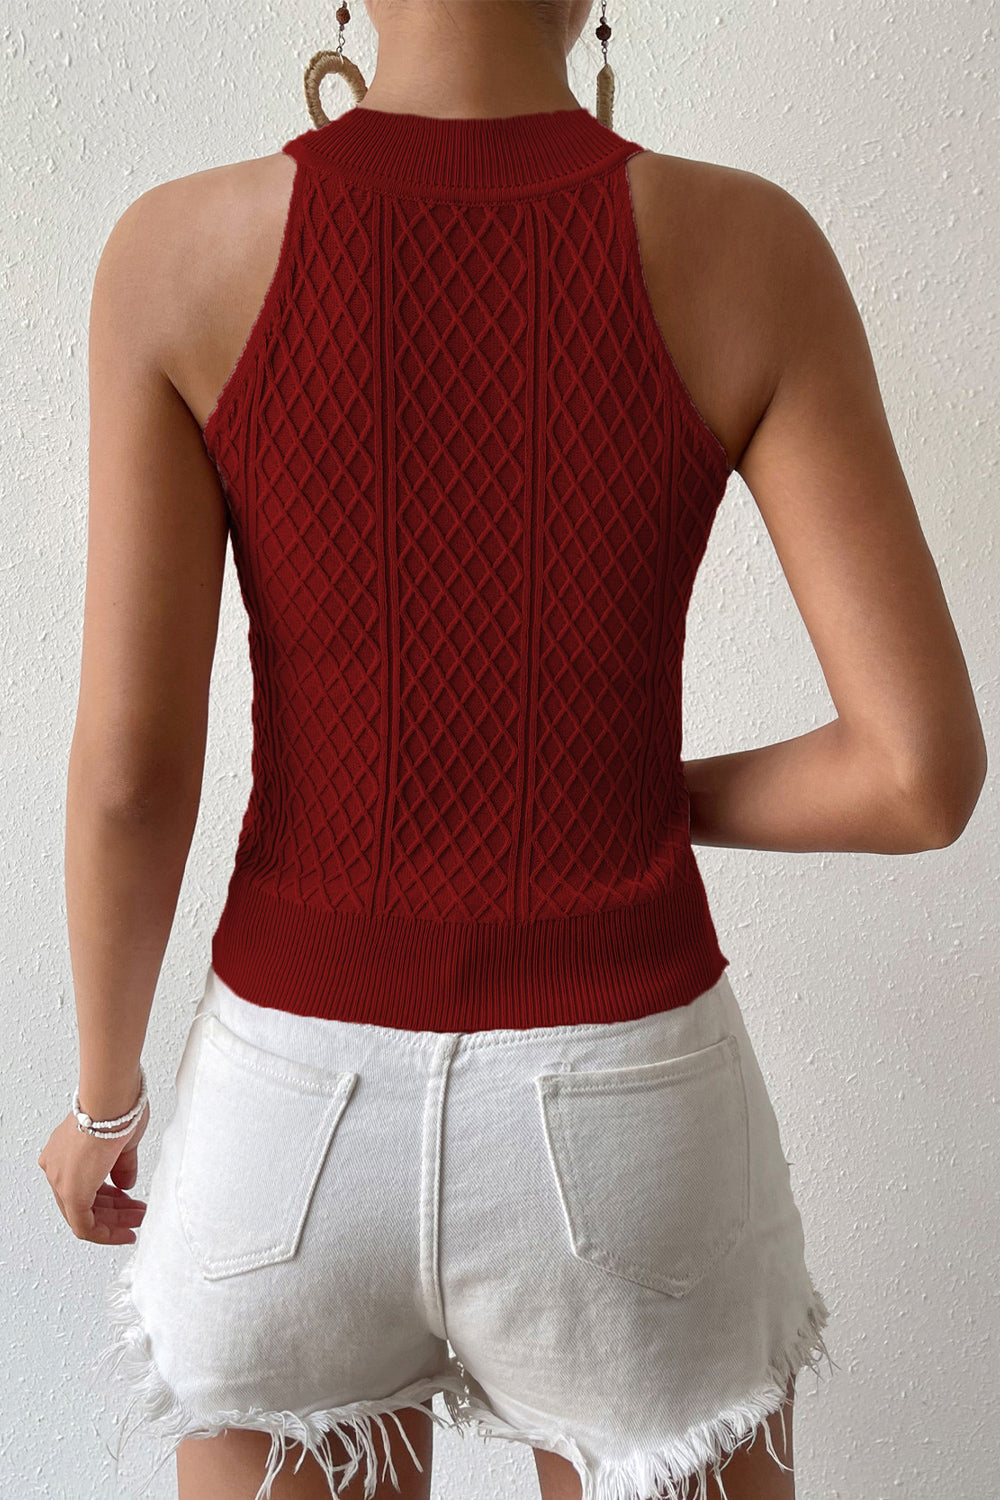 Round Neck Sleeveless Knit Top - Tops & Tees - Shirts & Tops - 12 - 2024